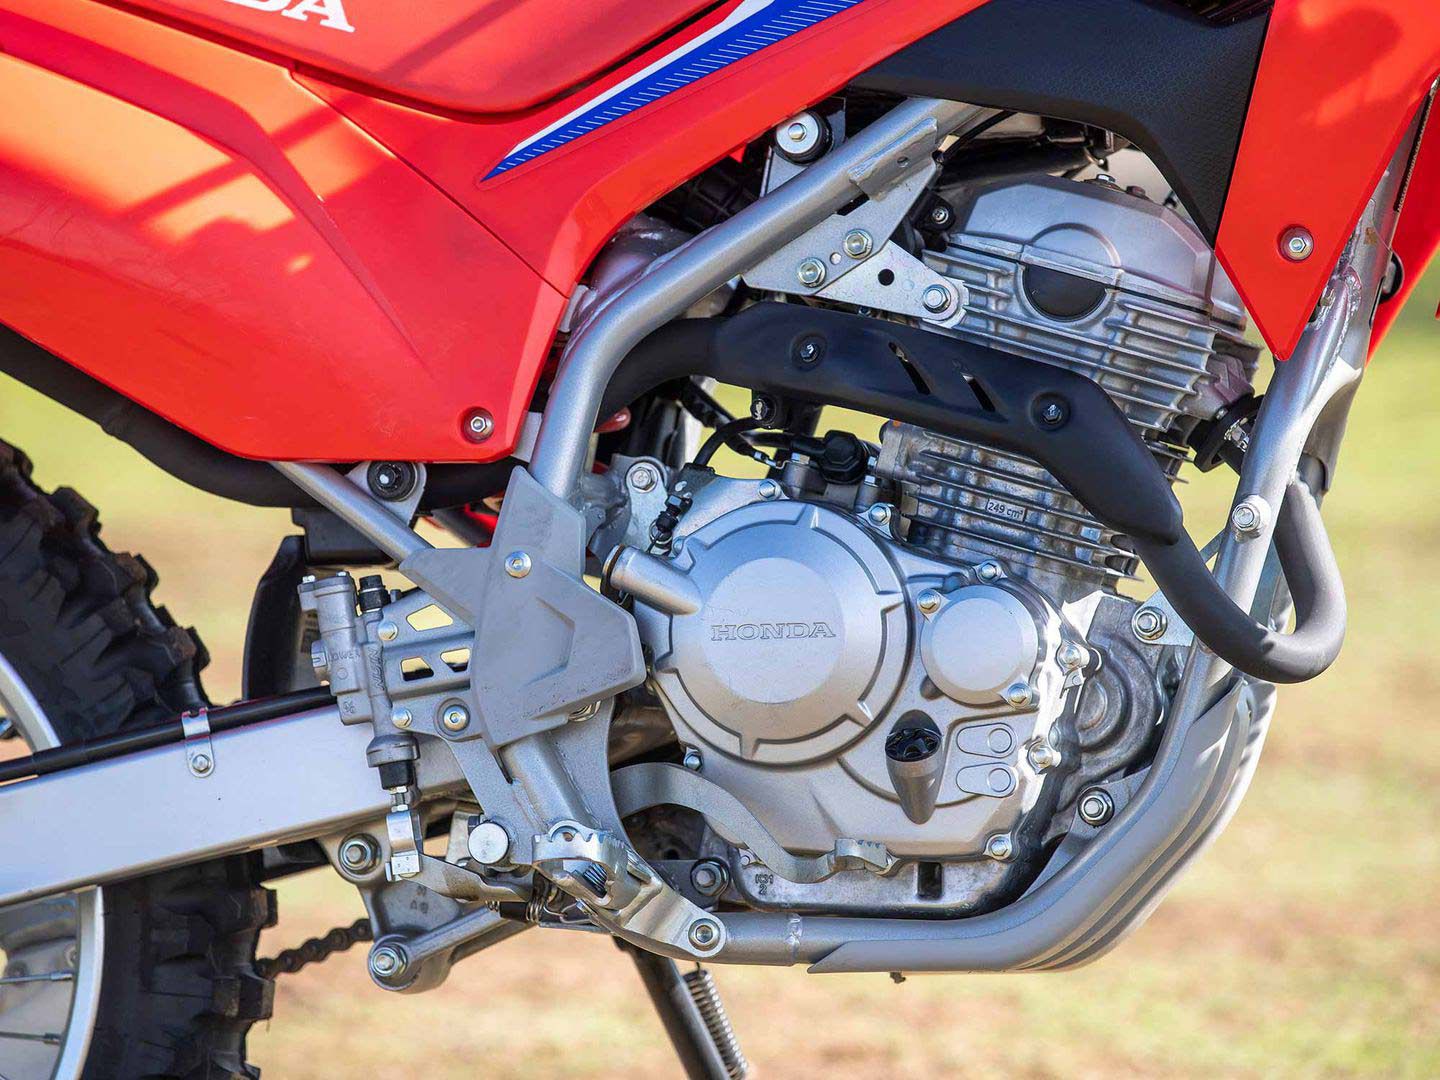 Fuel injection on this air-cooled four-stroke is a somewhat recent update. Benefits include linear power and easy start-up whether the bike has been sitting or is hot on the trail.